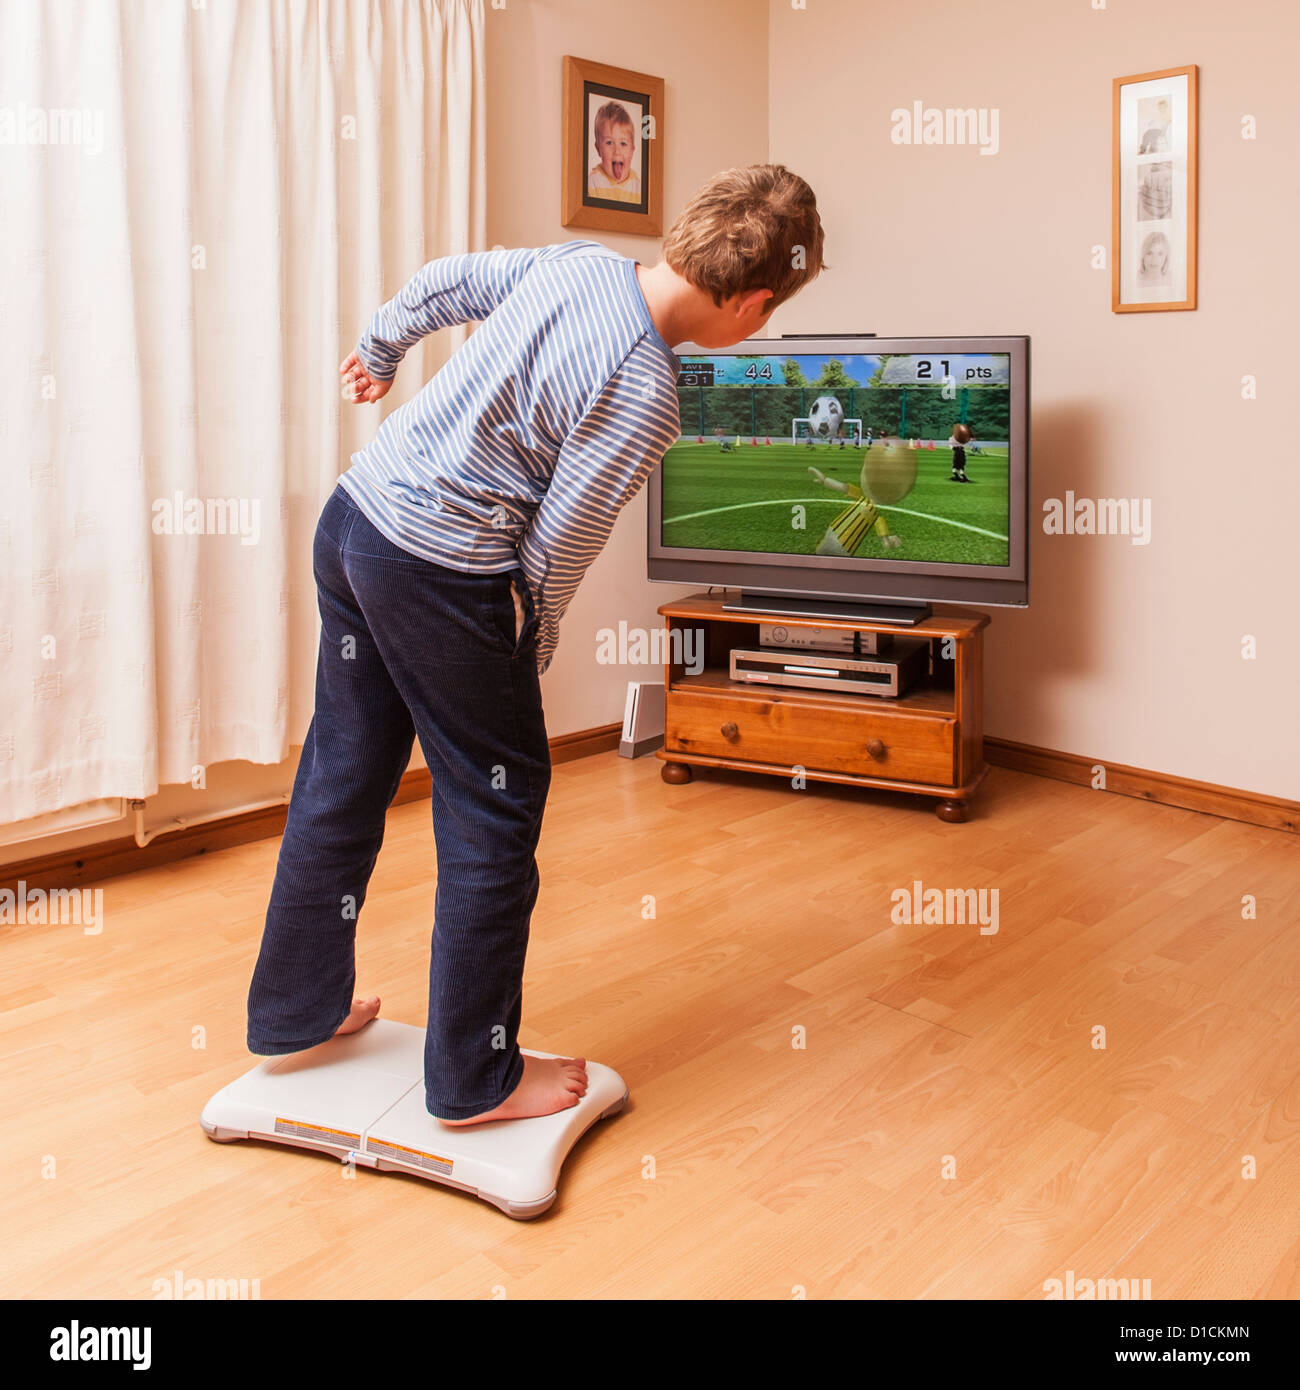 A 9 year old boy playing on a Nintendo Wii Fit board Stock Photo - Alamy